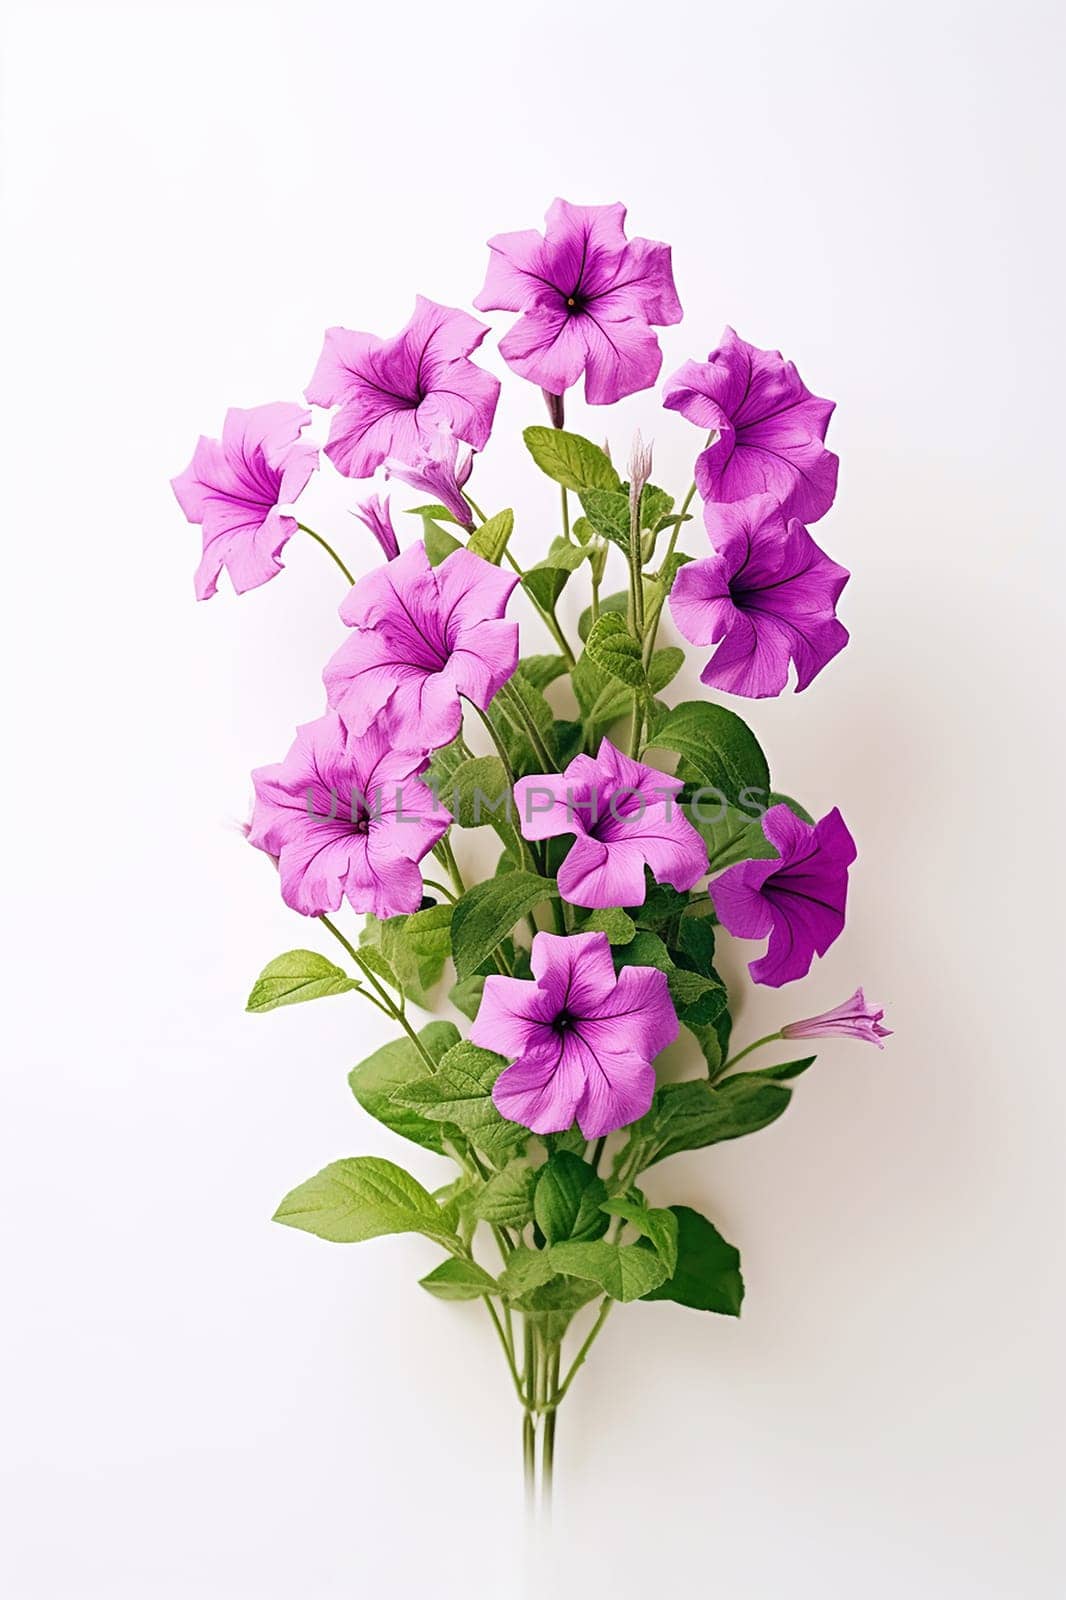 A vibrant bunch of purple petunias against a white background.